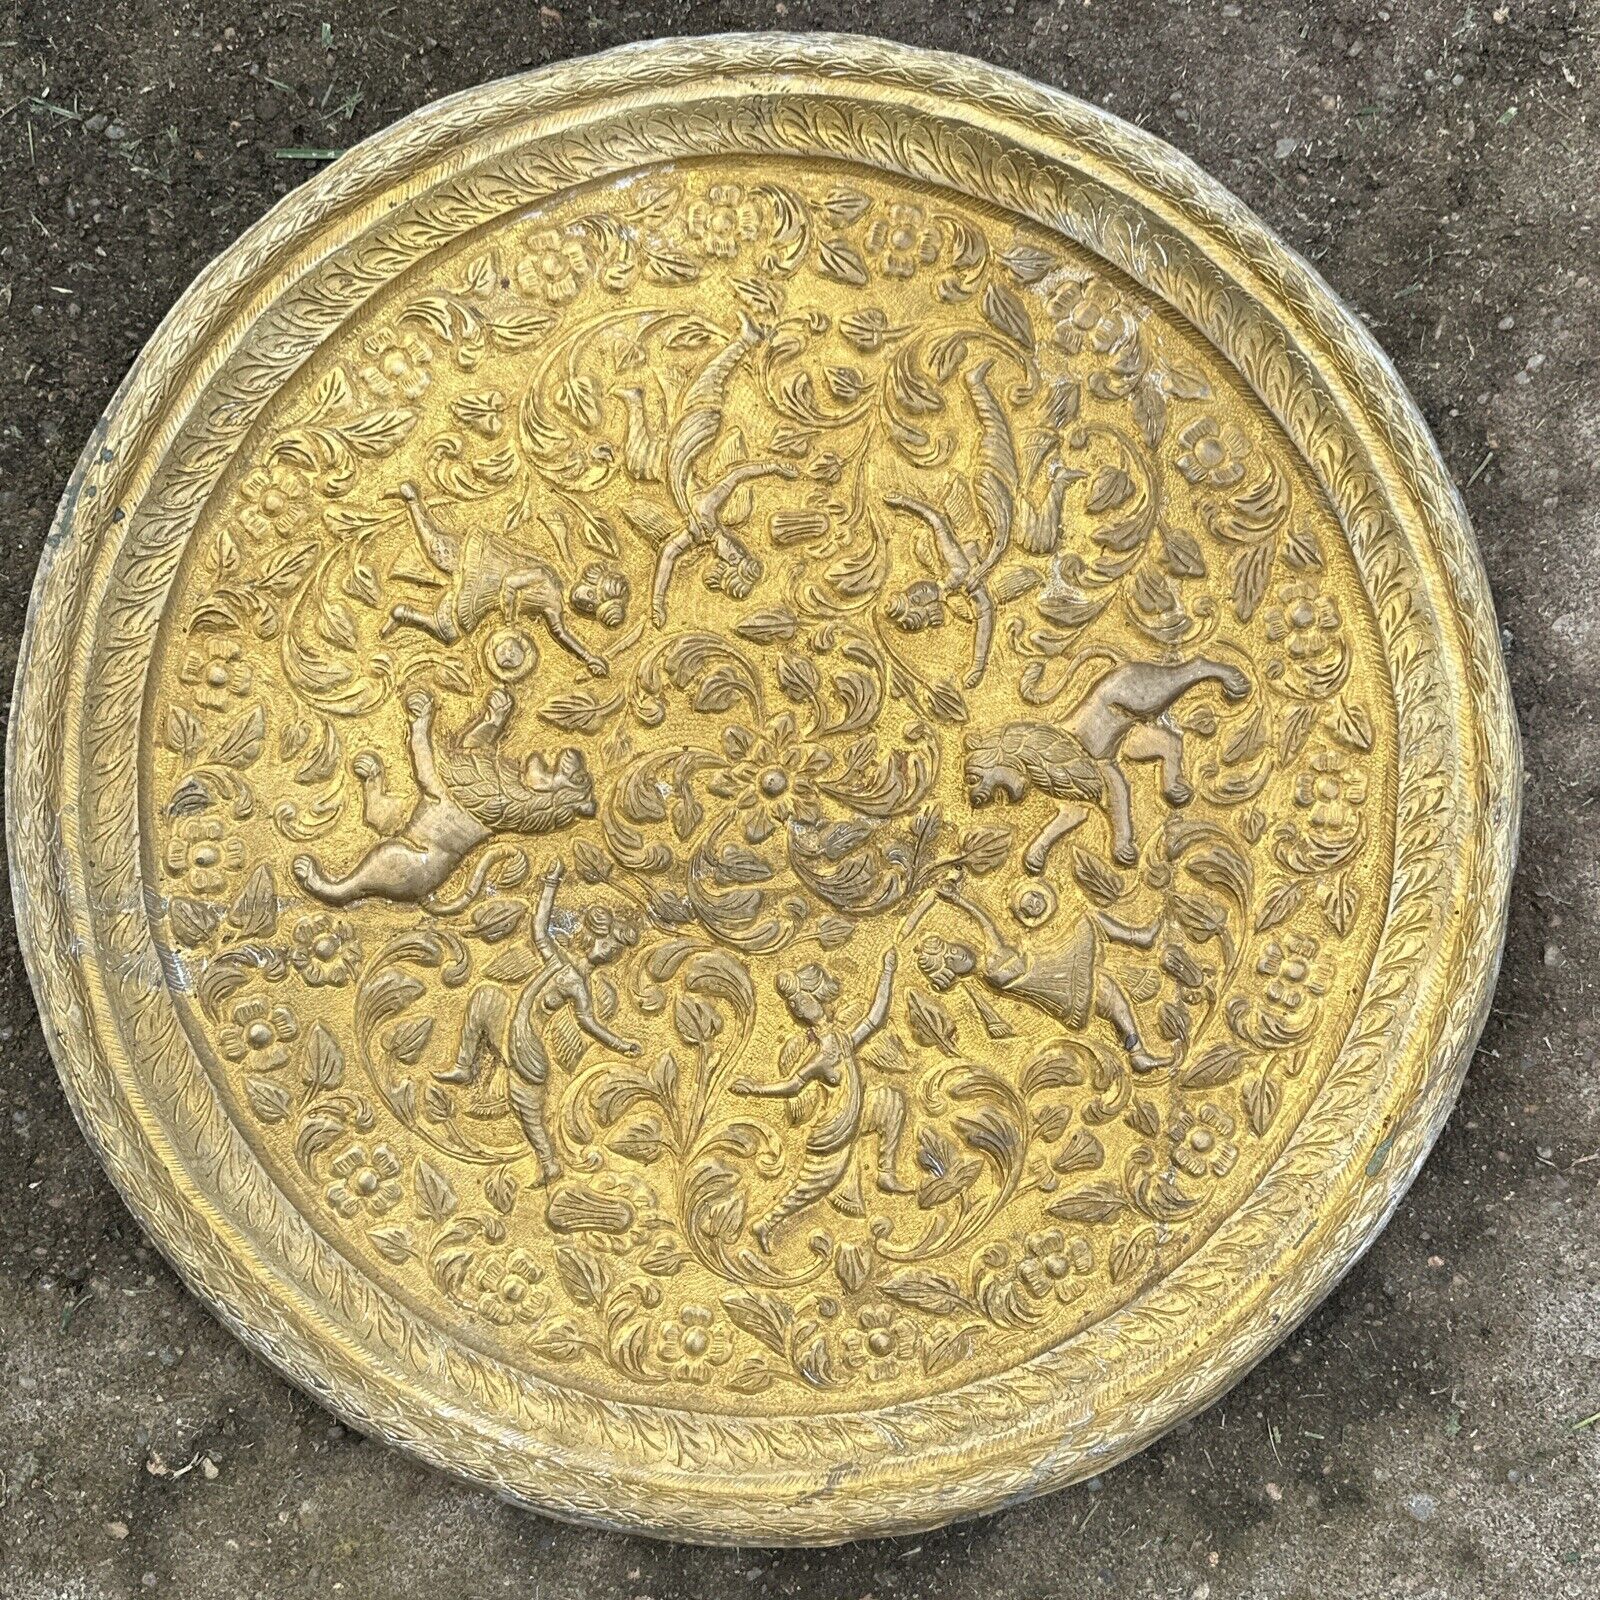 Vintage Heavily Embossed Brass Platter, with Lions and Winged Figures